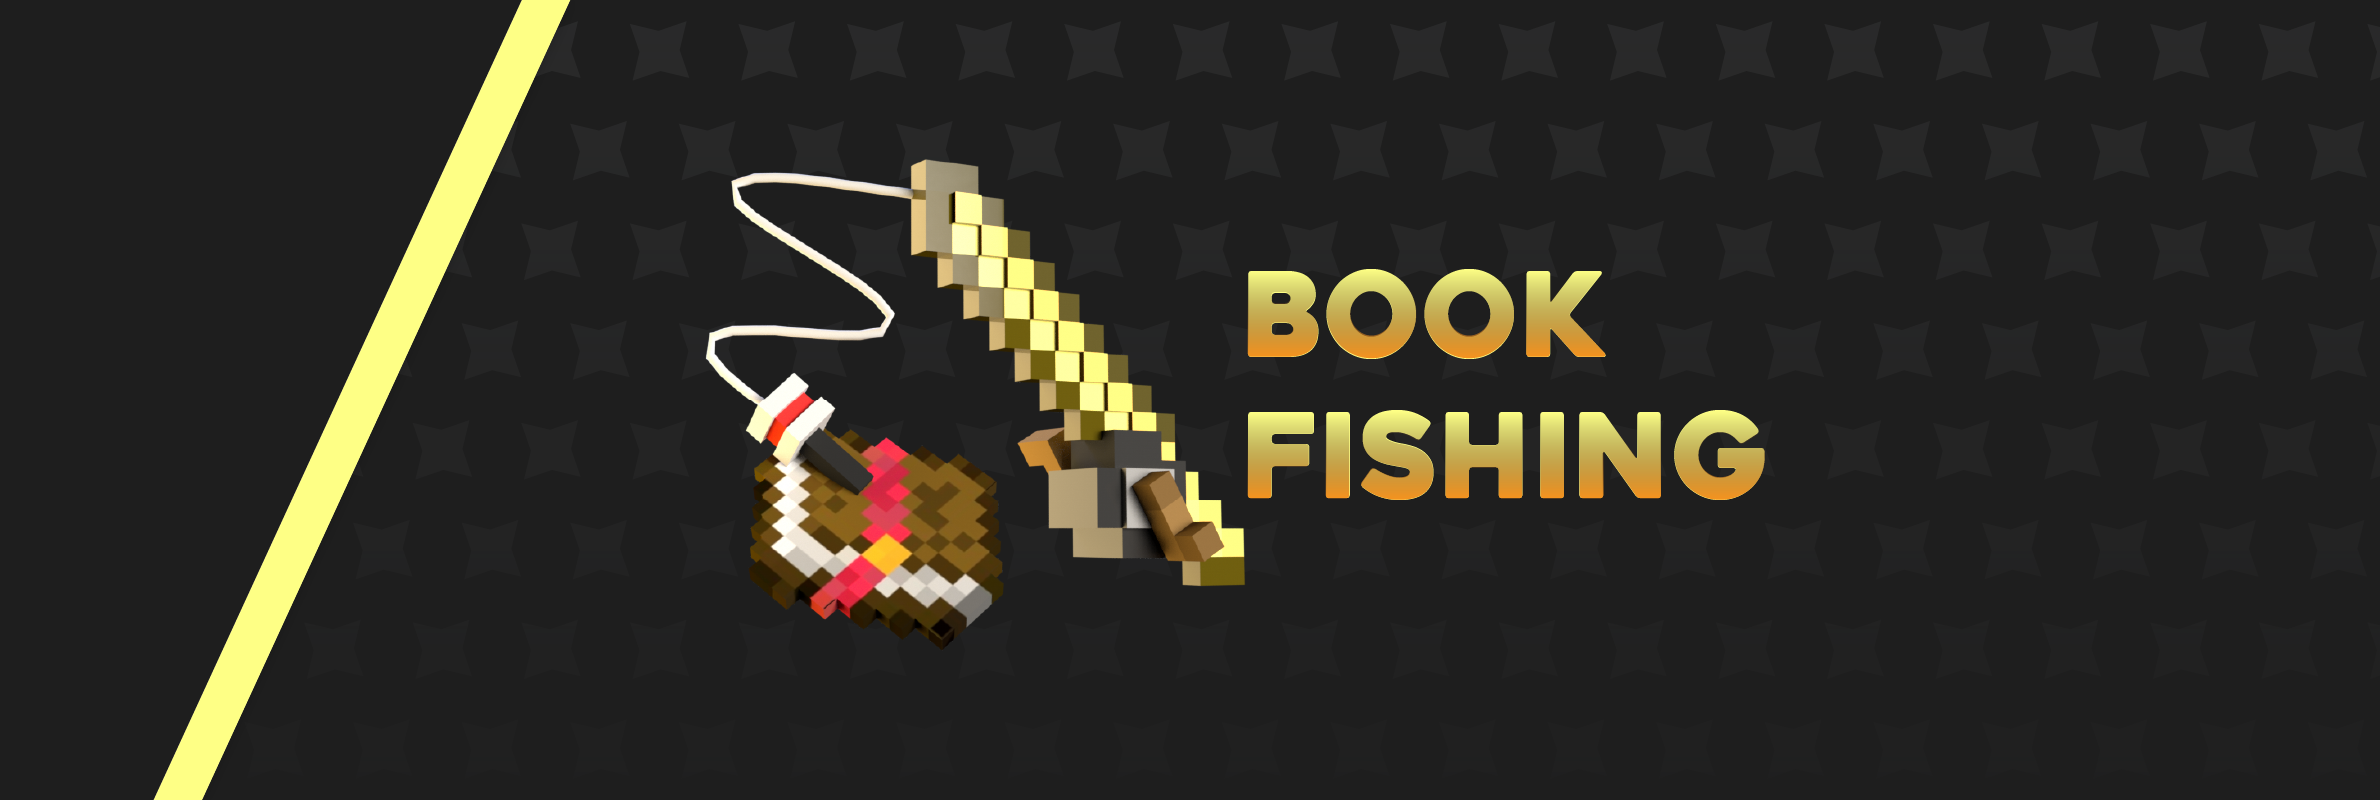 https://www.bisecthosting.com/images/CF/Book_Fishing/BH_BO_HEADER.png